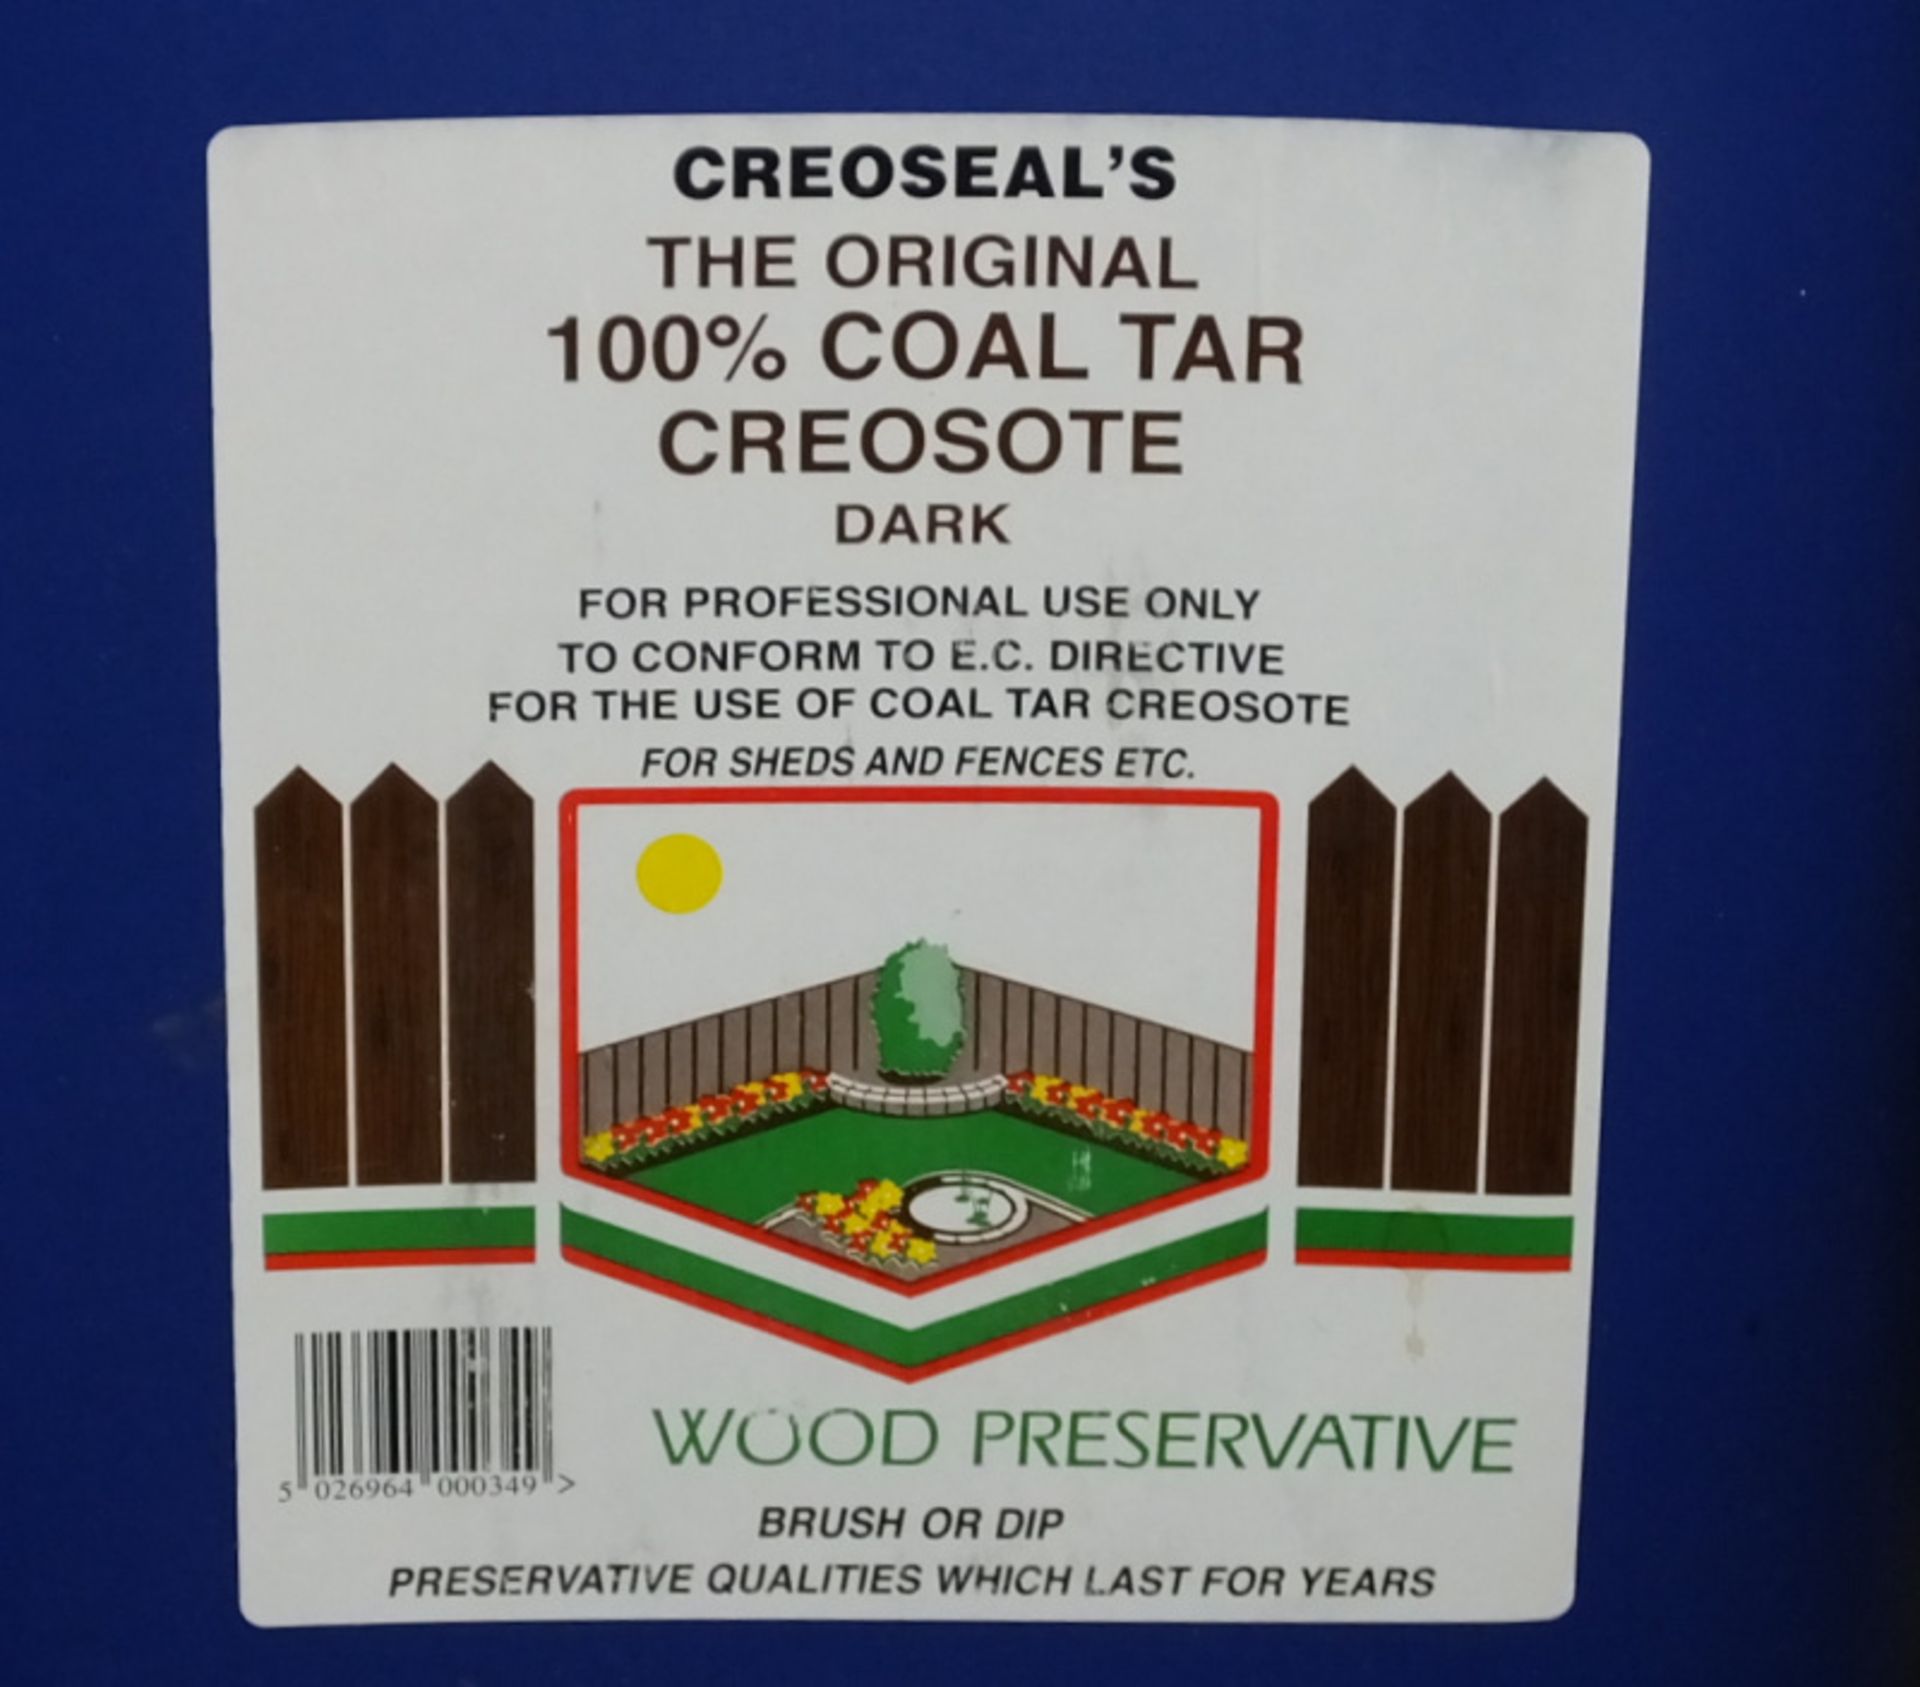 Creoseal's Original 100% Coal Tar Creosote - Dark - 20L - can only be sent via pallet service - Image 2 of 2